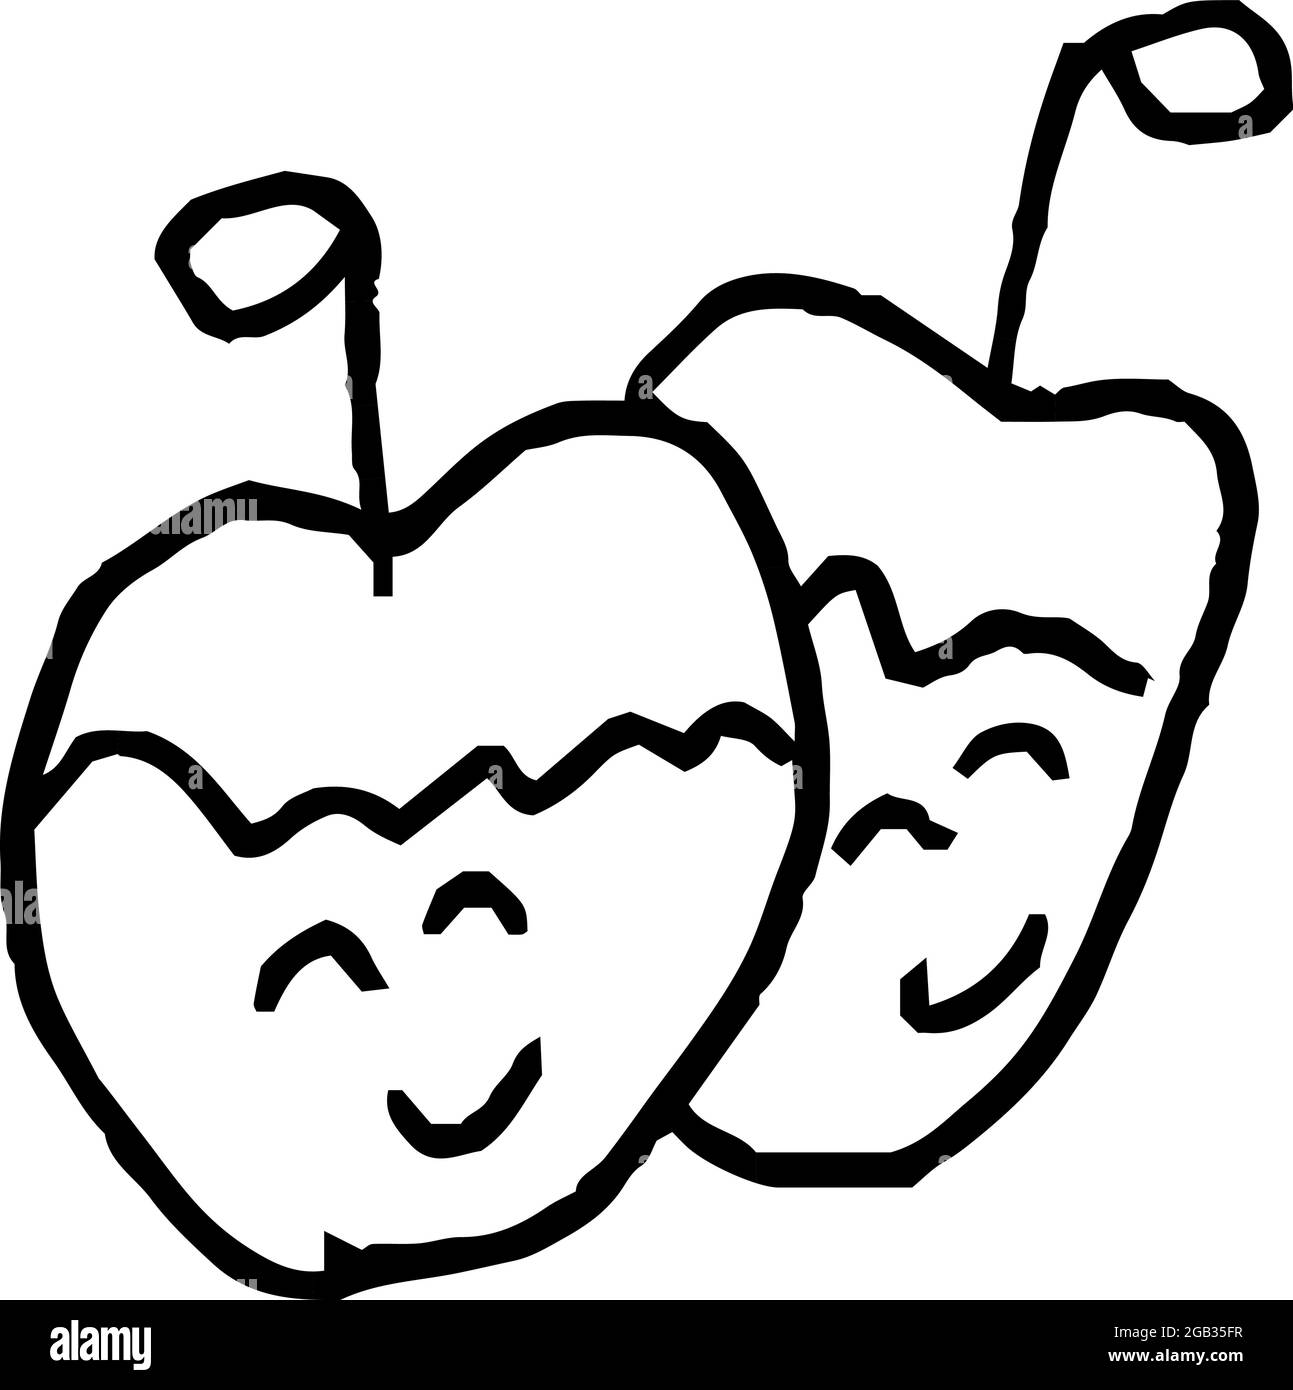 This is a illustration of Cute apple scribble drawn by a child Stock Vector